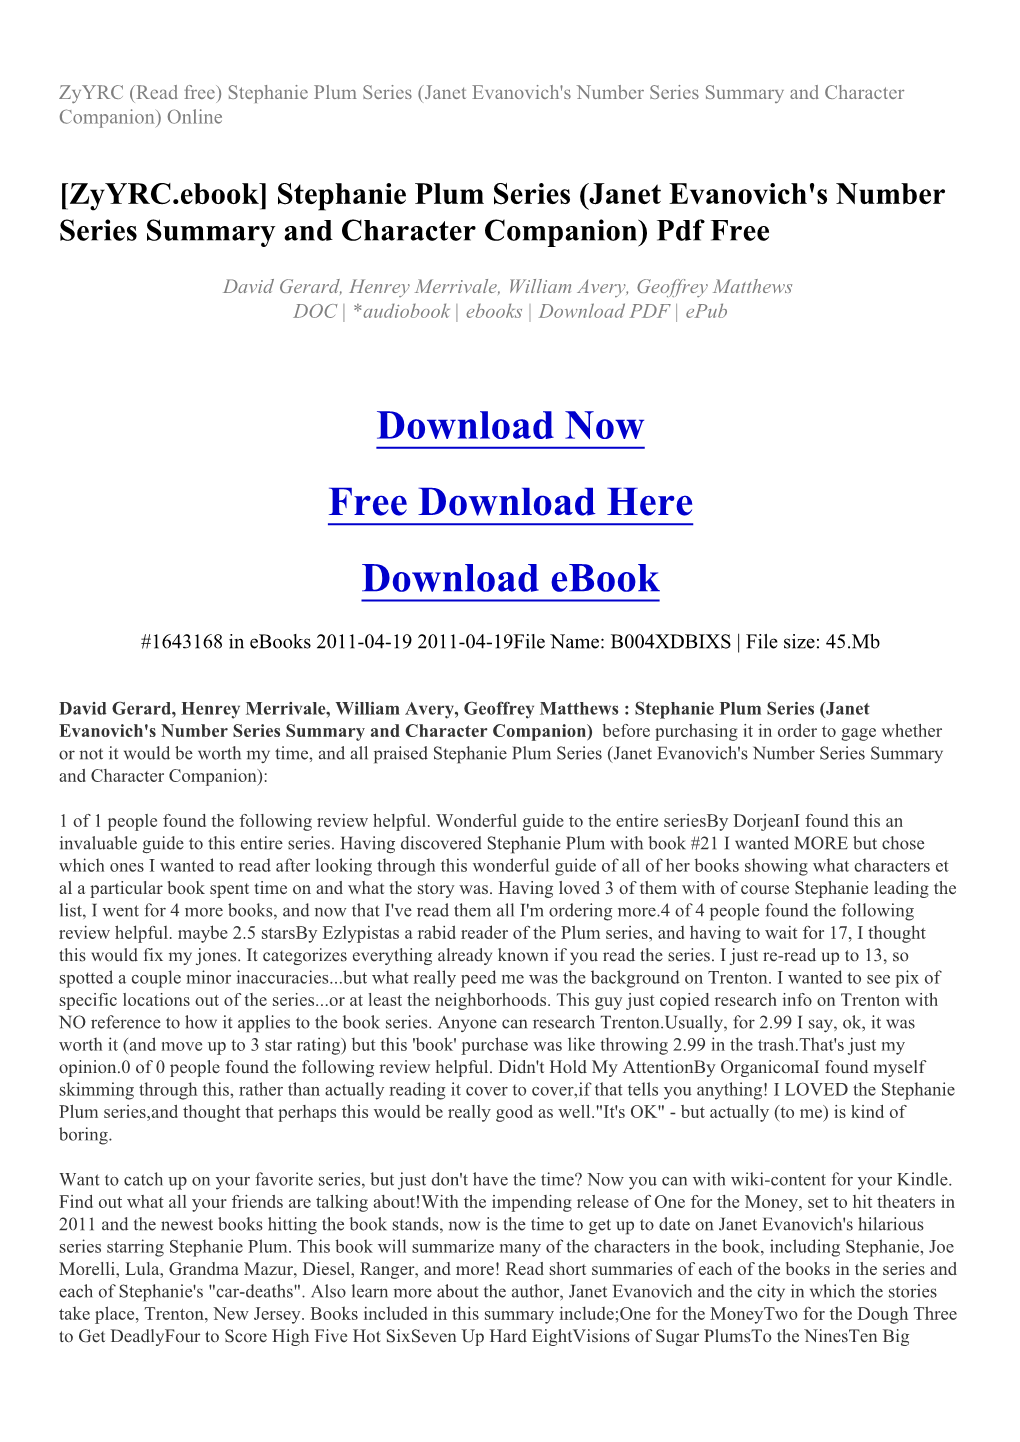 Stephanie Plum Series (Janet Evanovich's Number Series Summary and Character Companion) Online